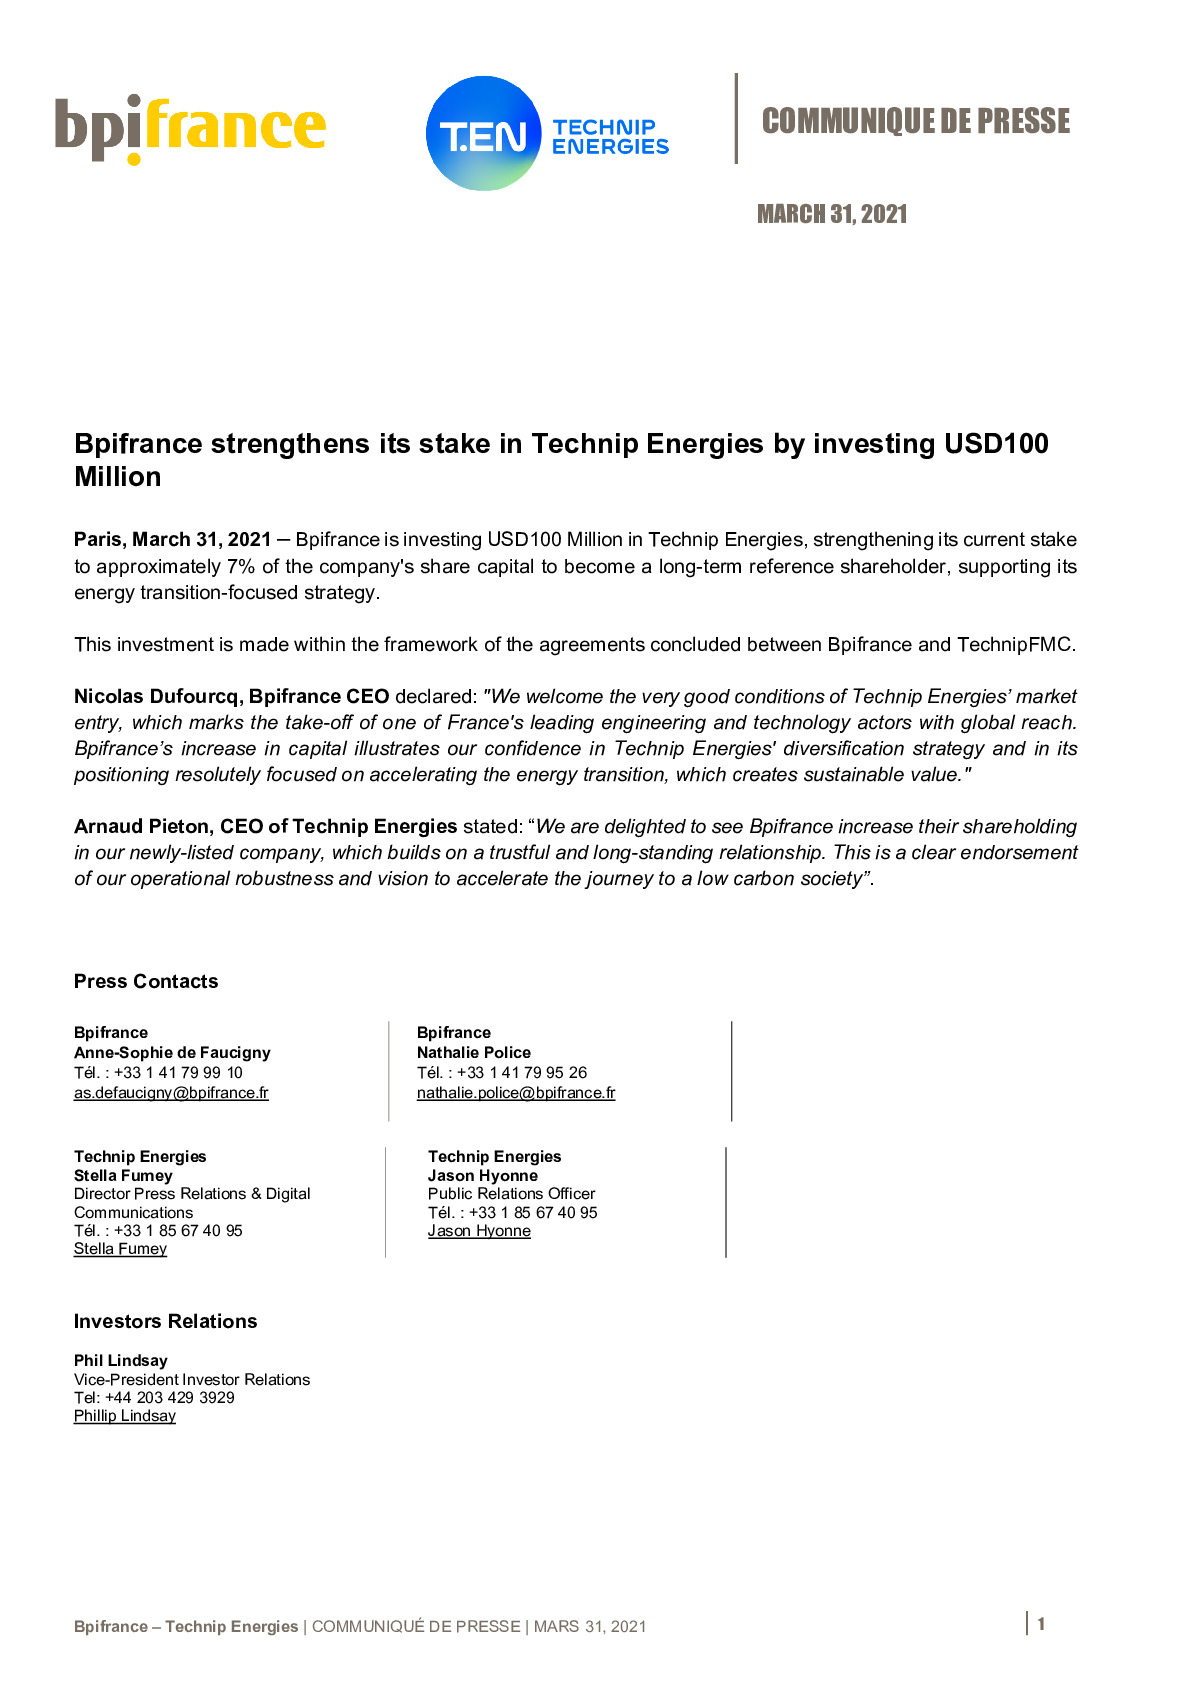 2021 03 31 – PR Bpifrance invests USD 100M in Technip Energies-pdf